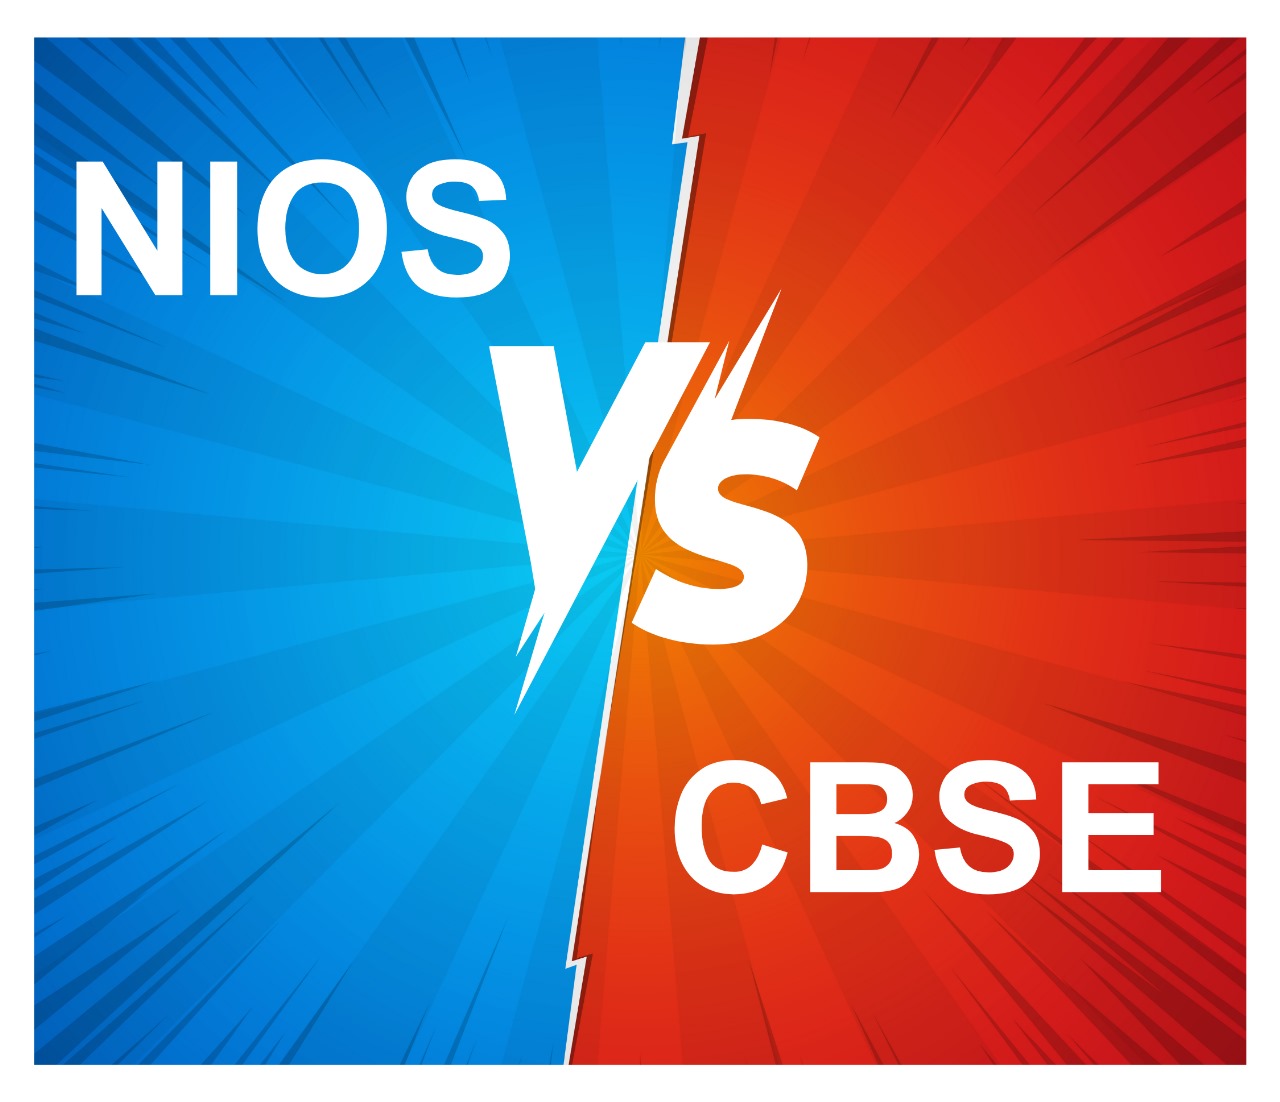 CBSE VS NIOS WHICH IS BETTER